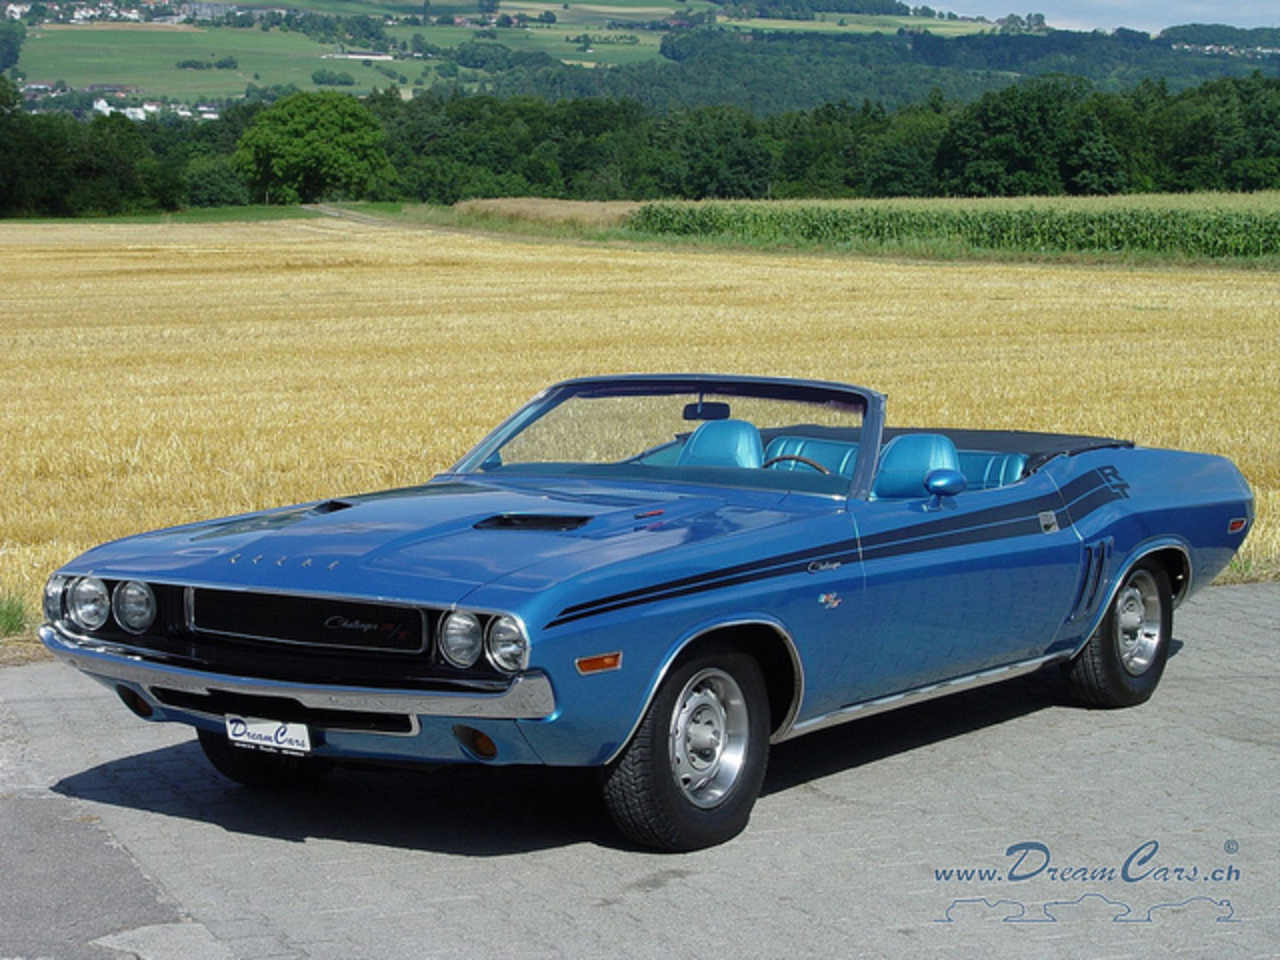 Dodge-Challenger-RT-Convertible-1970-02 | Flickr - Photo Sharing!